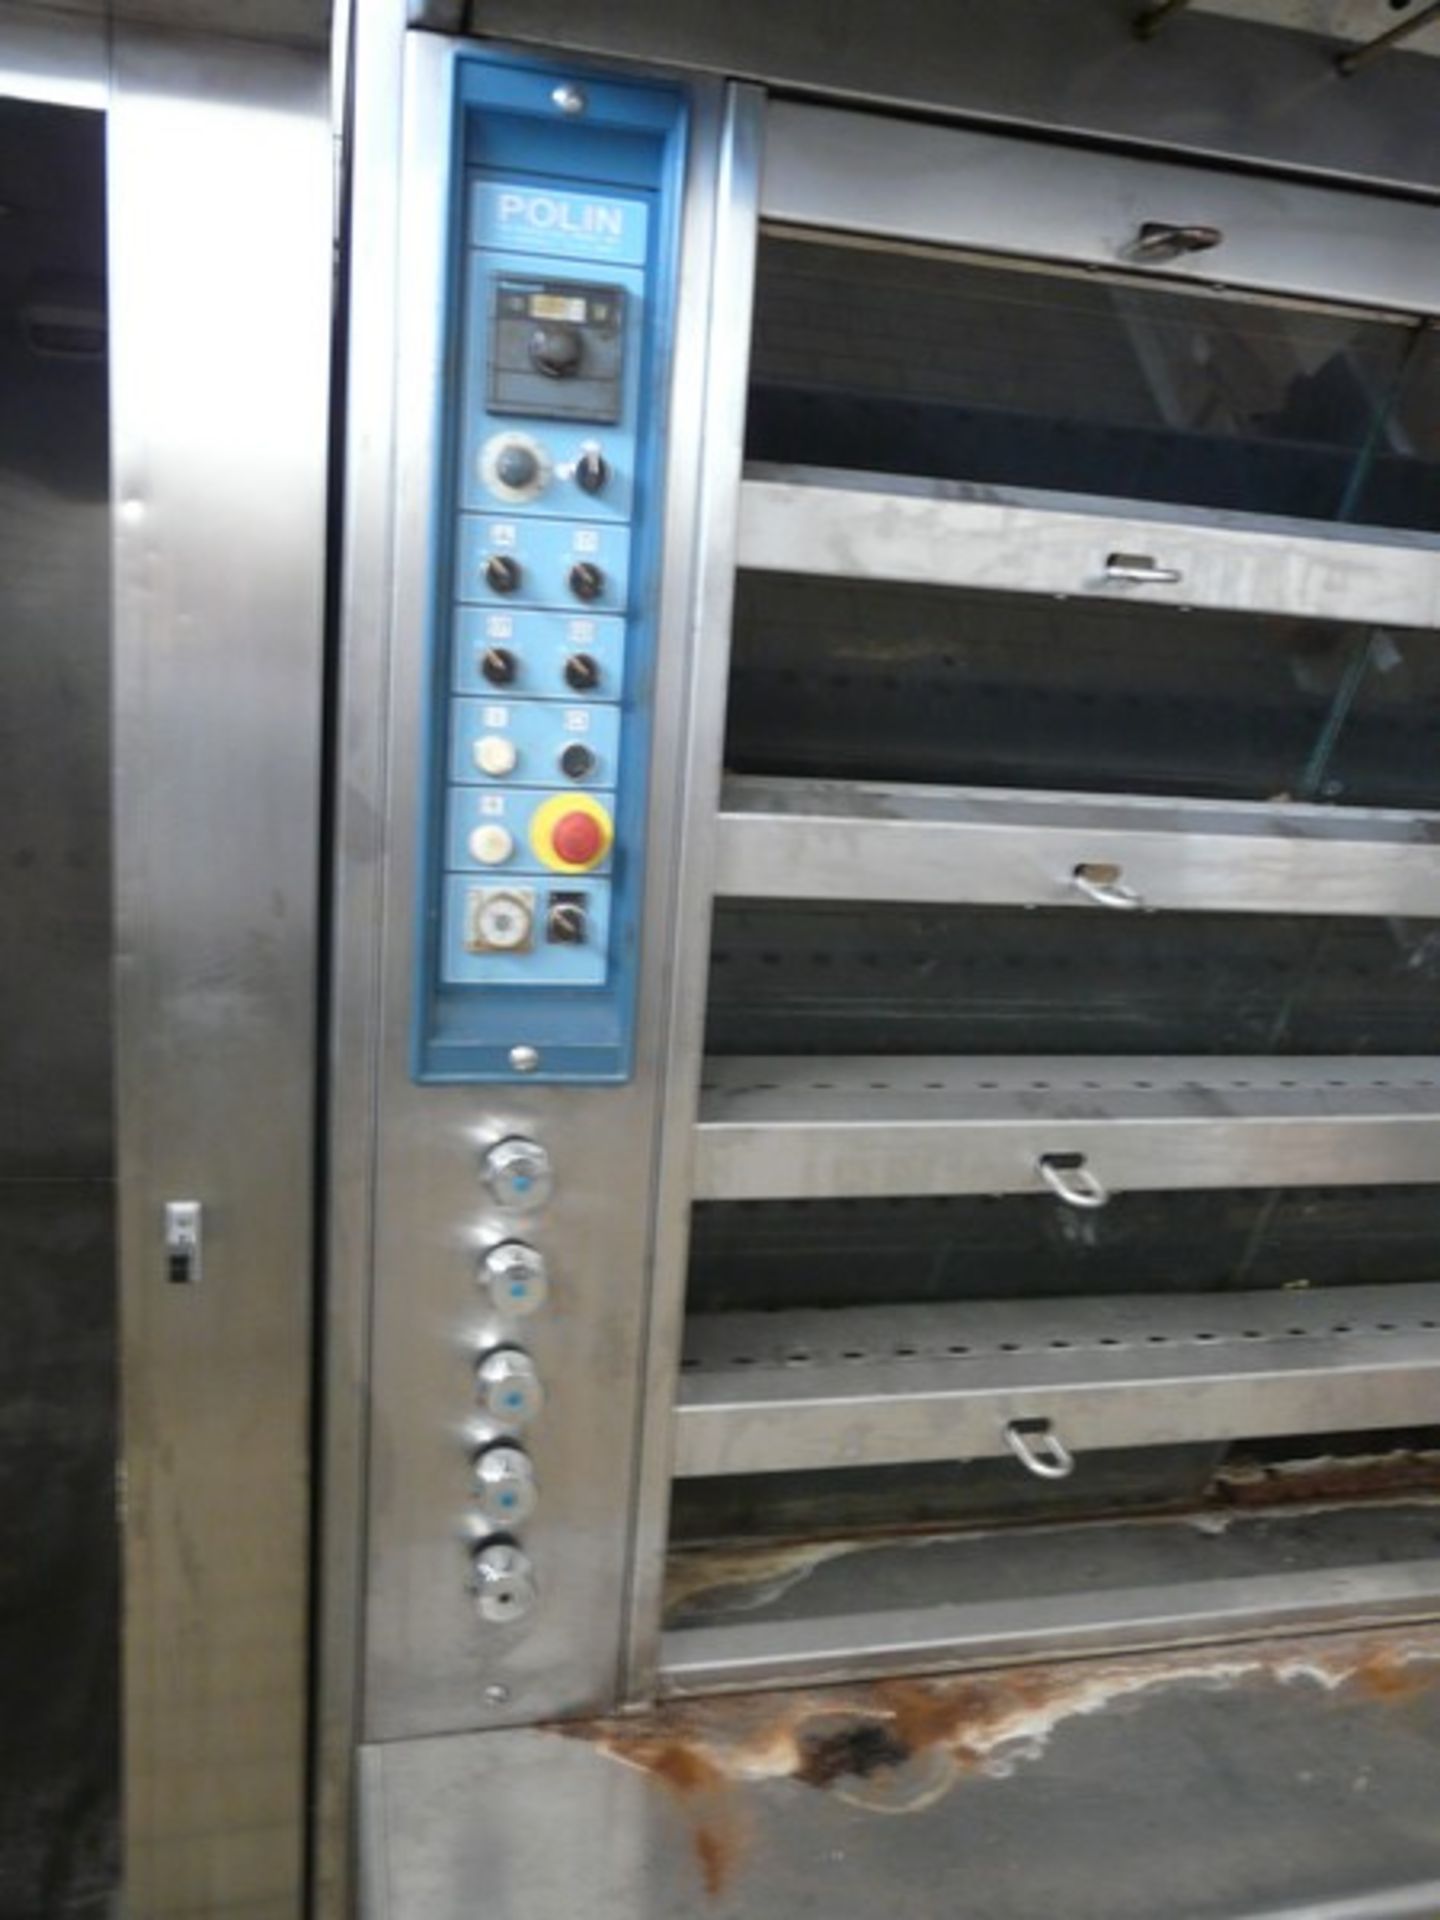 English: POLIN Oven With 10 Stations, Humidity, Gas Burner, Y.O.M.: 2003, Construction Stainless - Bild 3 aus 12